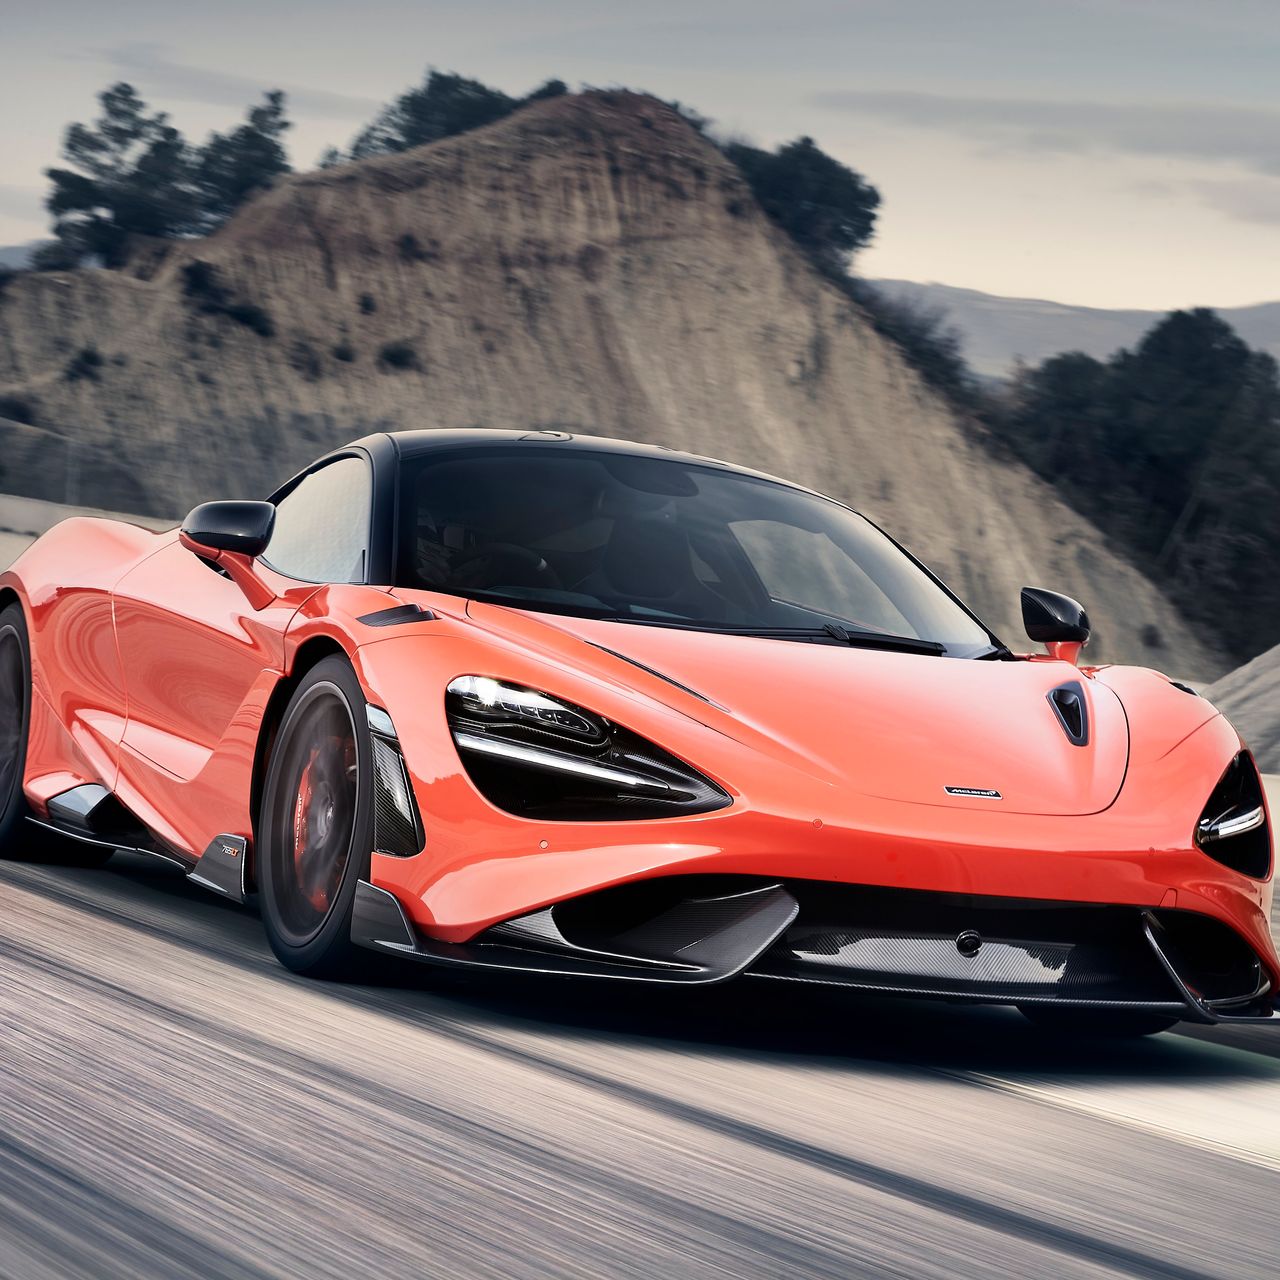 2021 McLaren 765LT: An Extreme Supercar, Now Faster and Lighter - WSJ